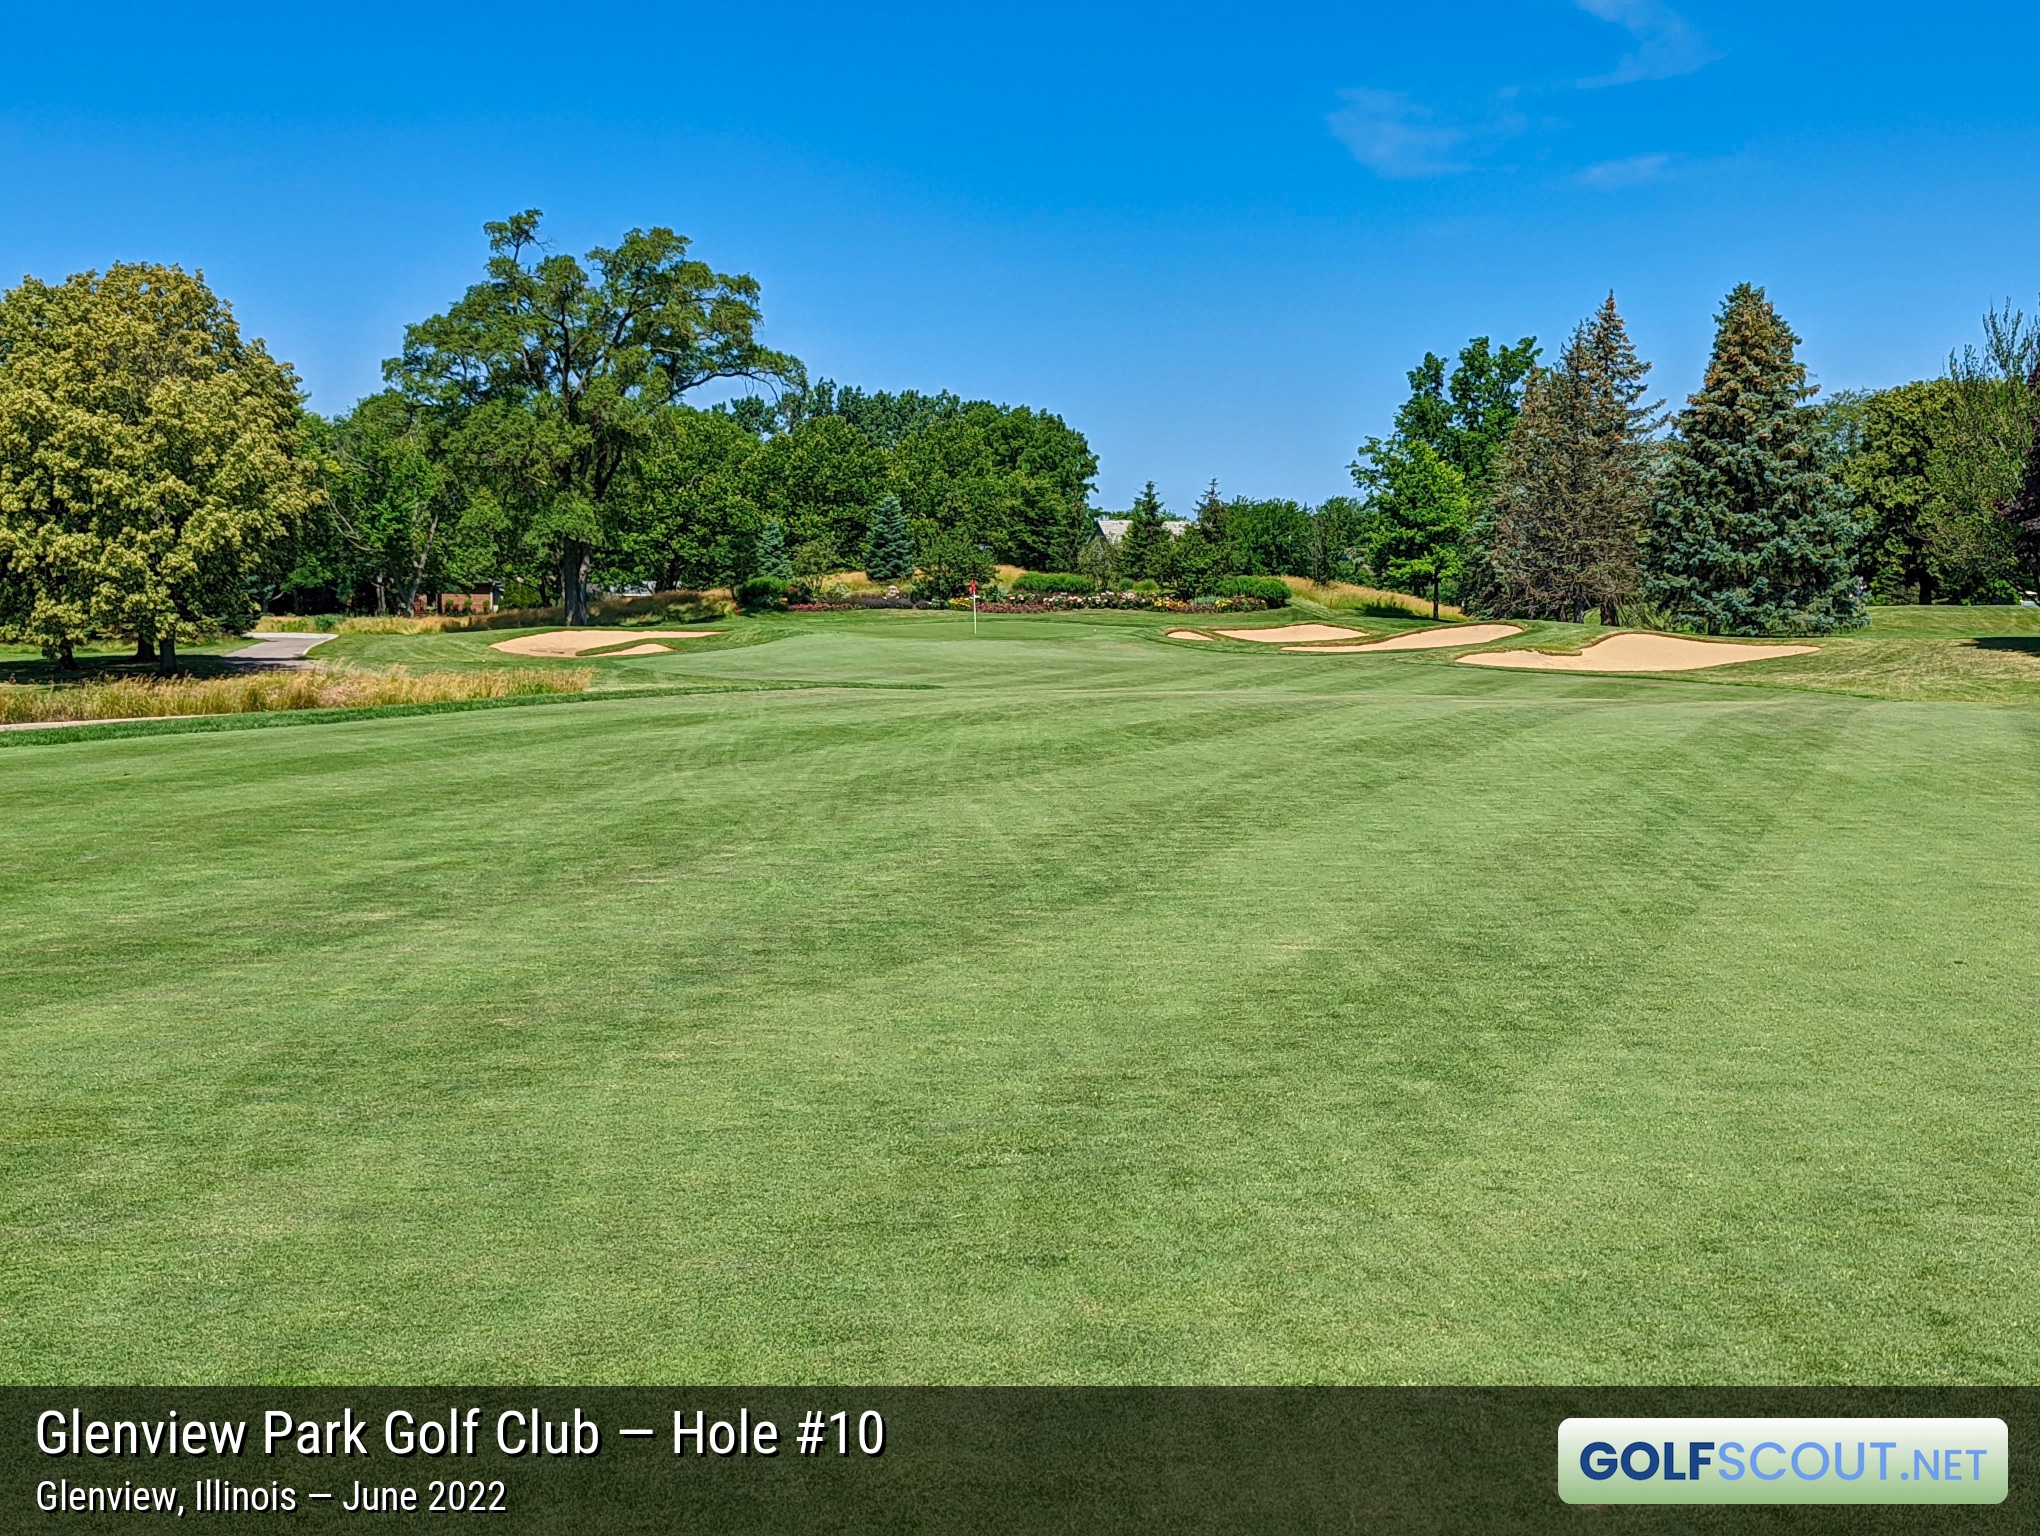 Photo of hole #10 at Glenview Park Golf Club in Glenview, Illinois. 